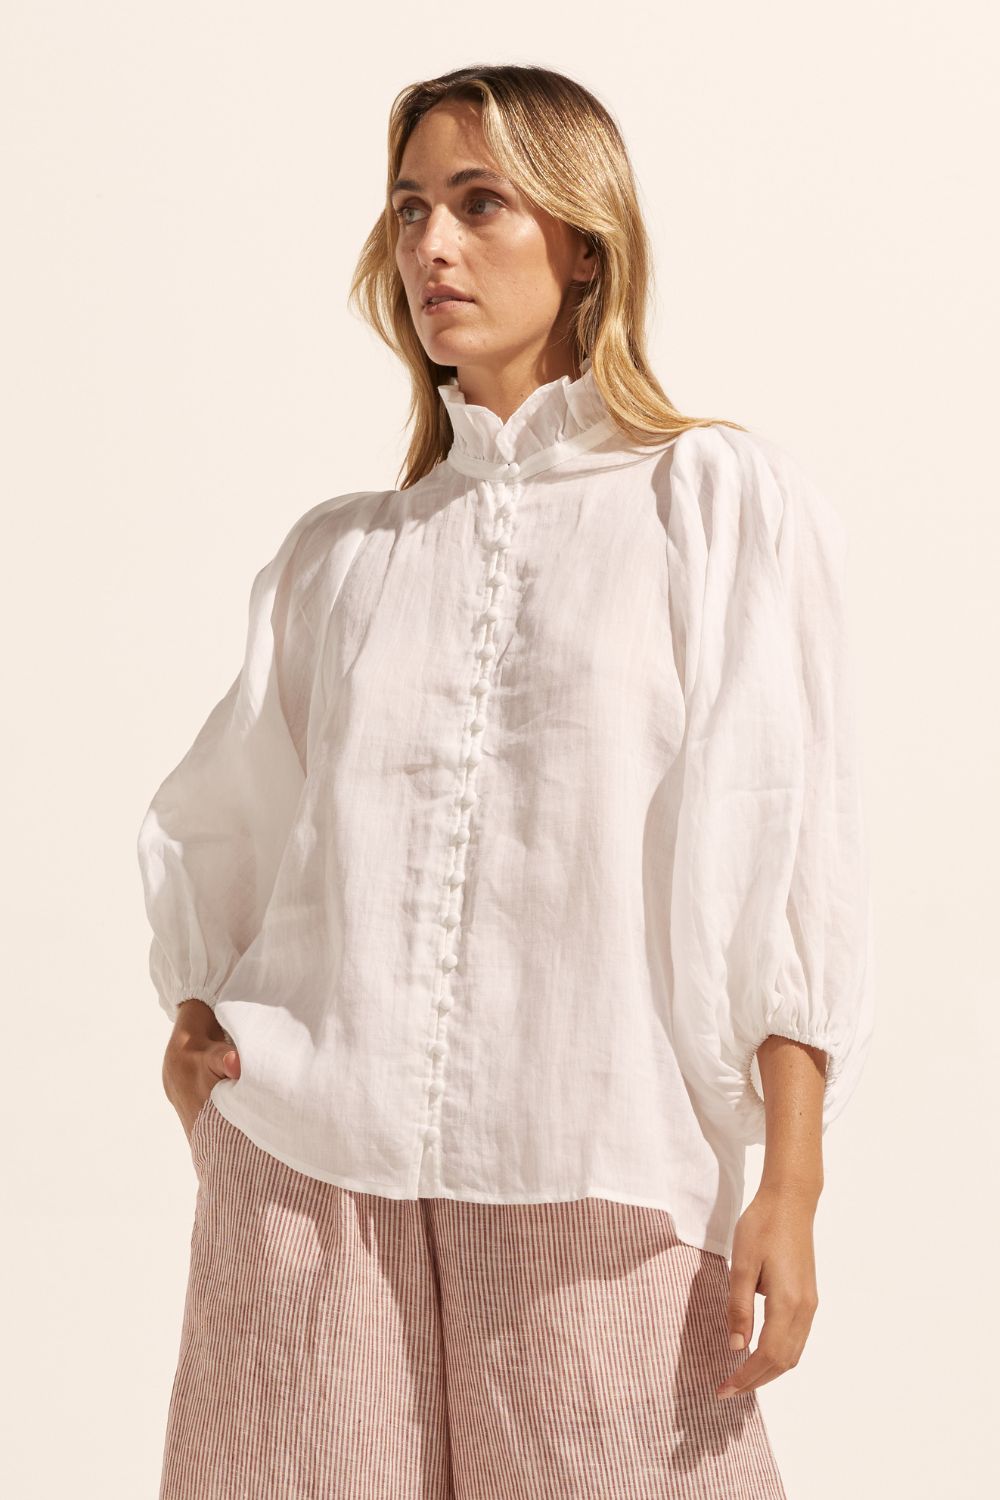 white, ruffle neck collar, buttons down centre, mid length sleeve, shirt, front view